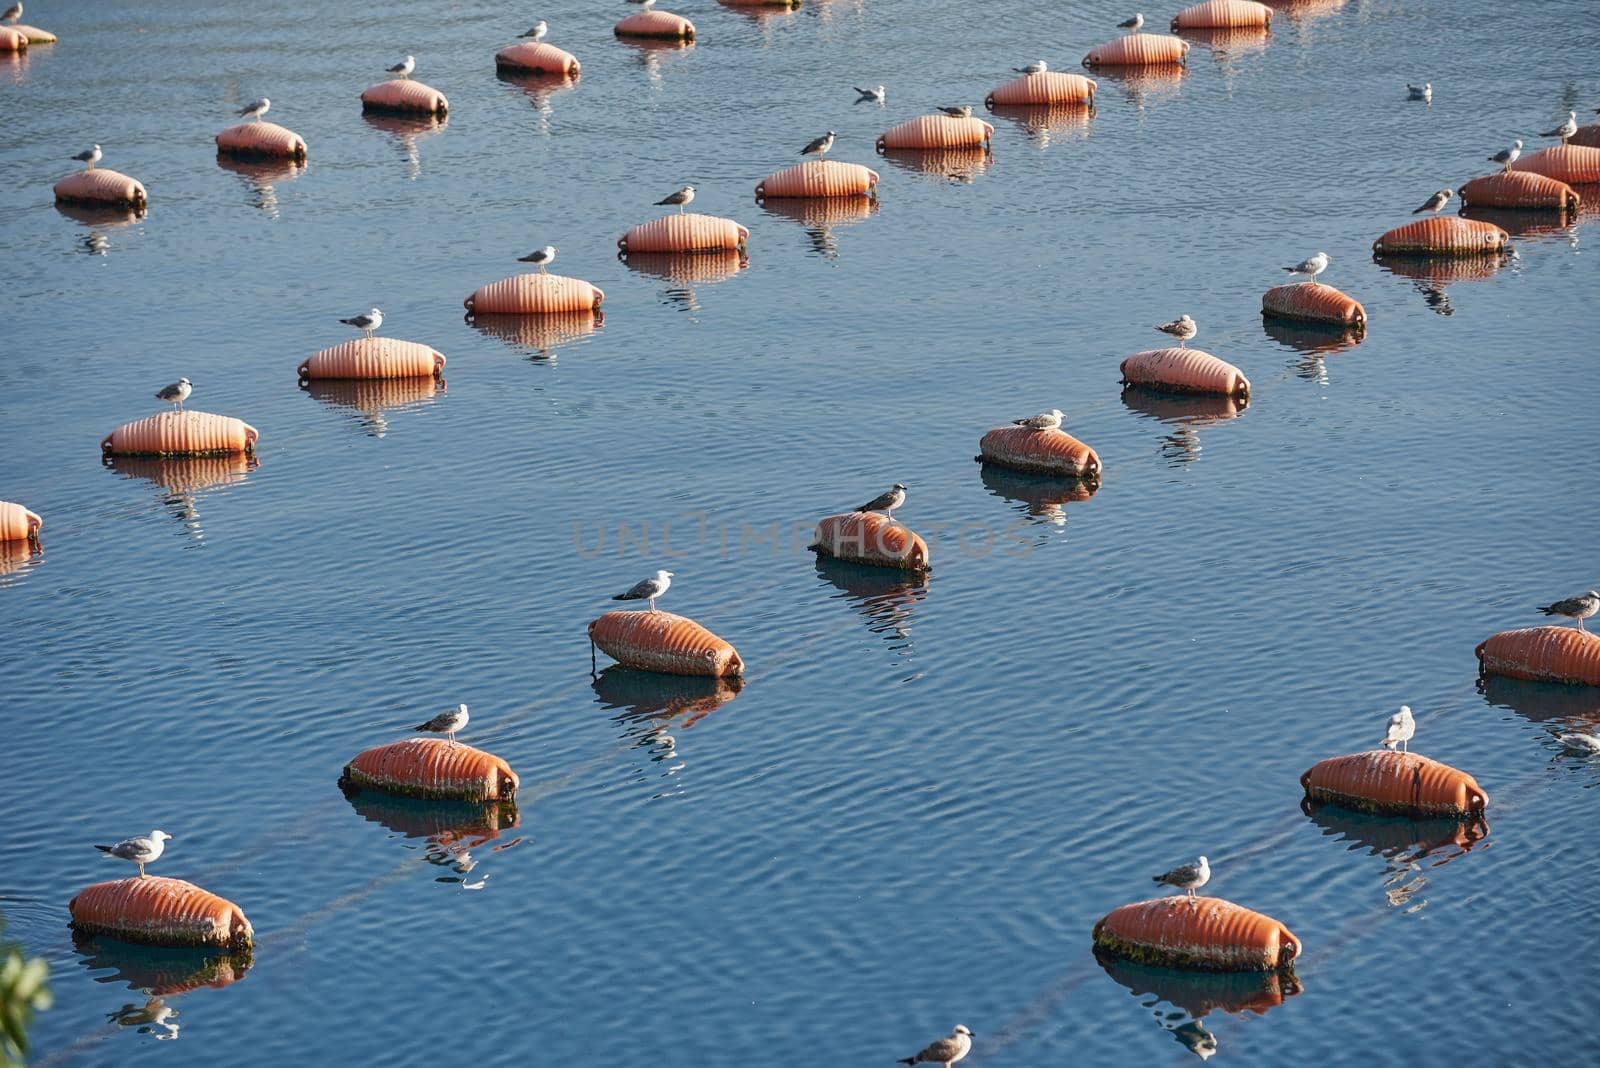 Seagulls are sitting in an oyster farm in the sea, funny animals by iceberg